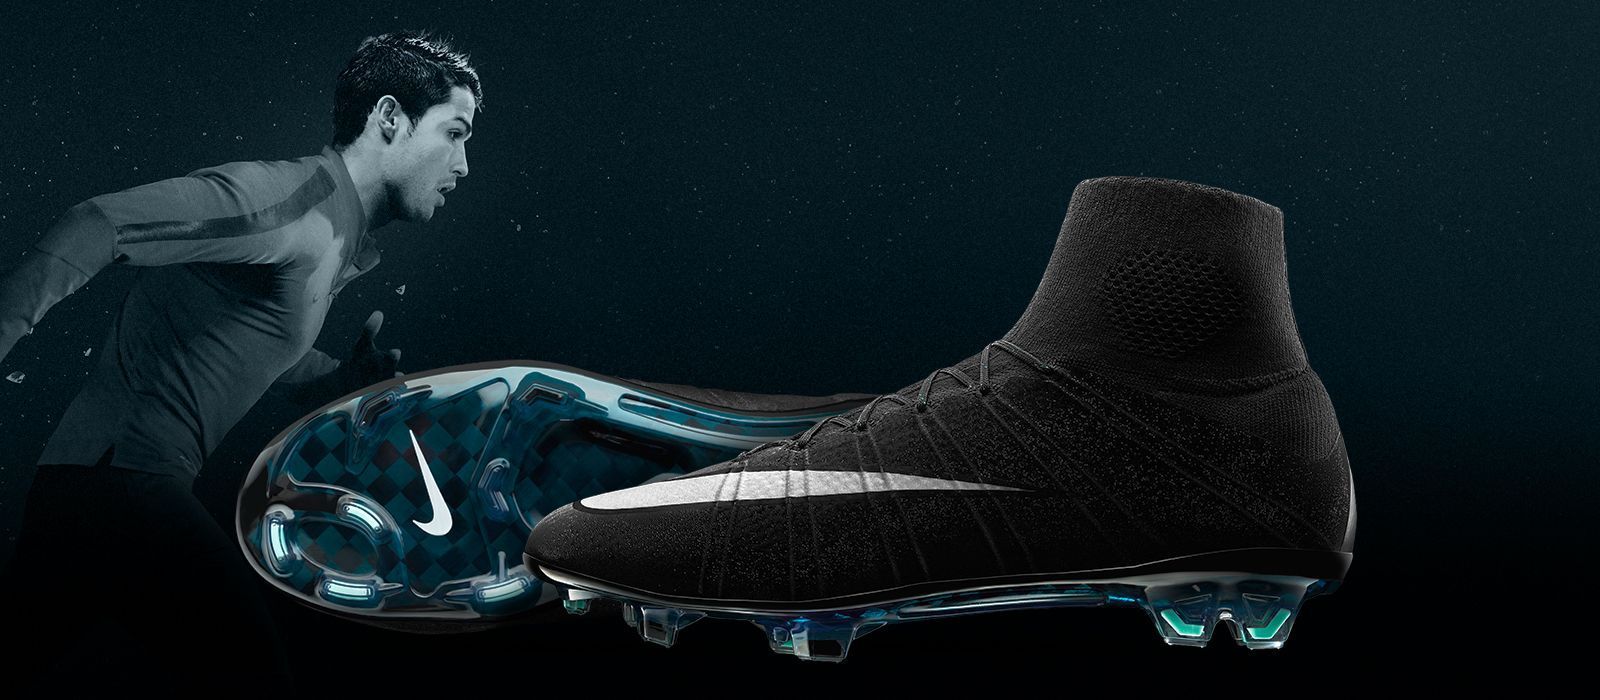 Free Download 40 Mercurial Cr7 Galaxy Wallpapers Download At